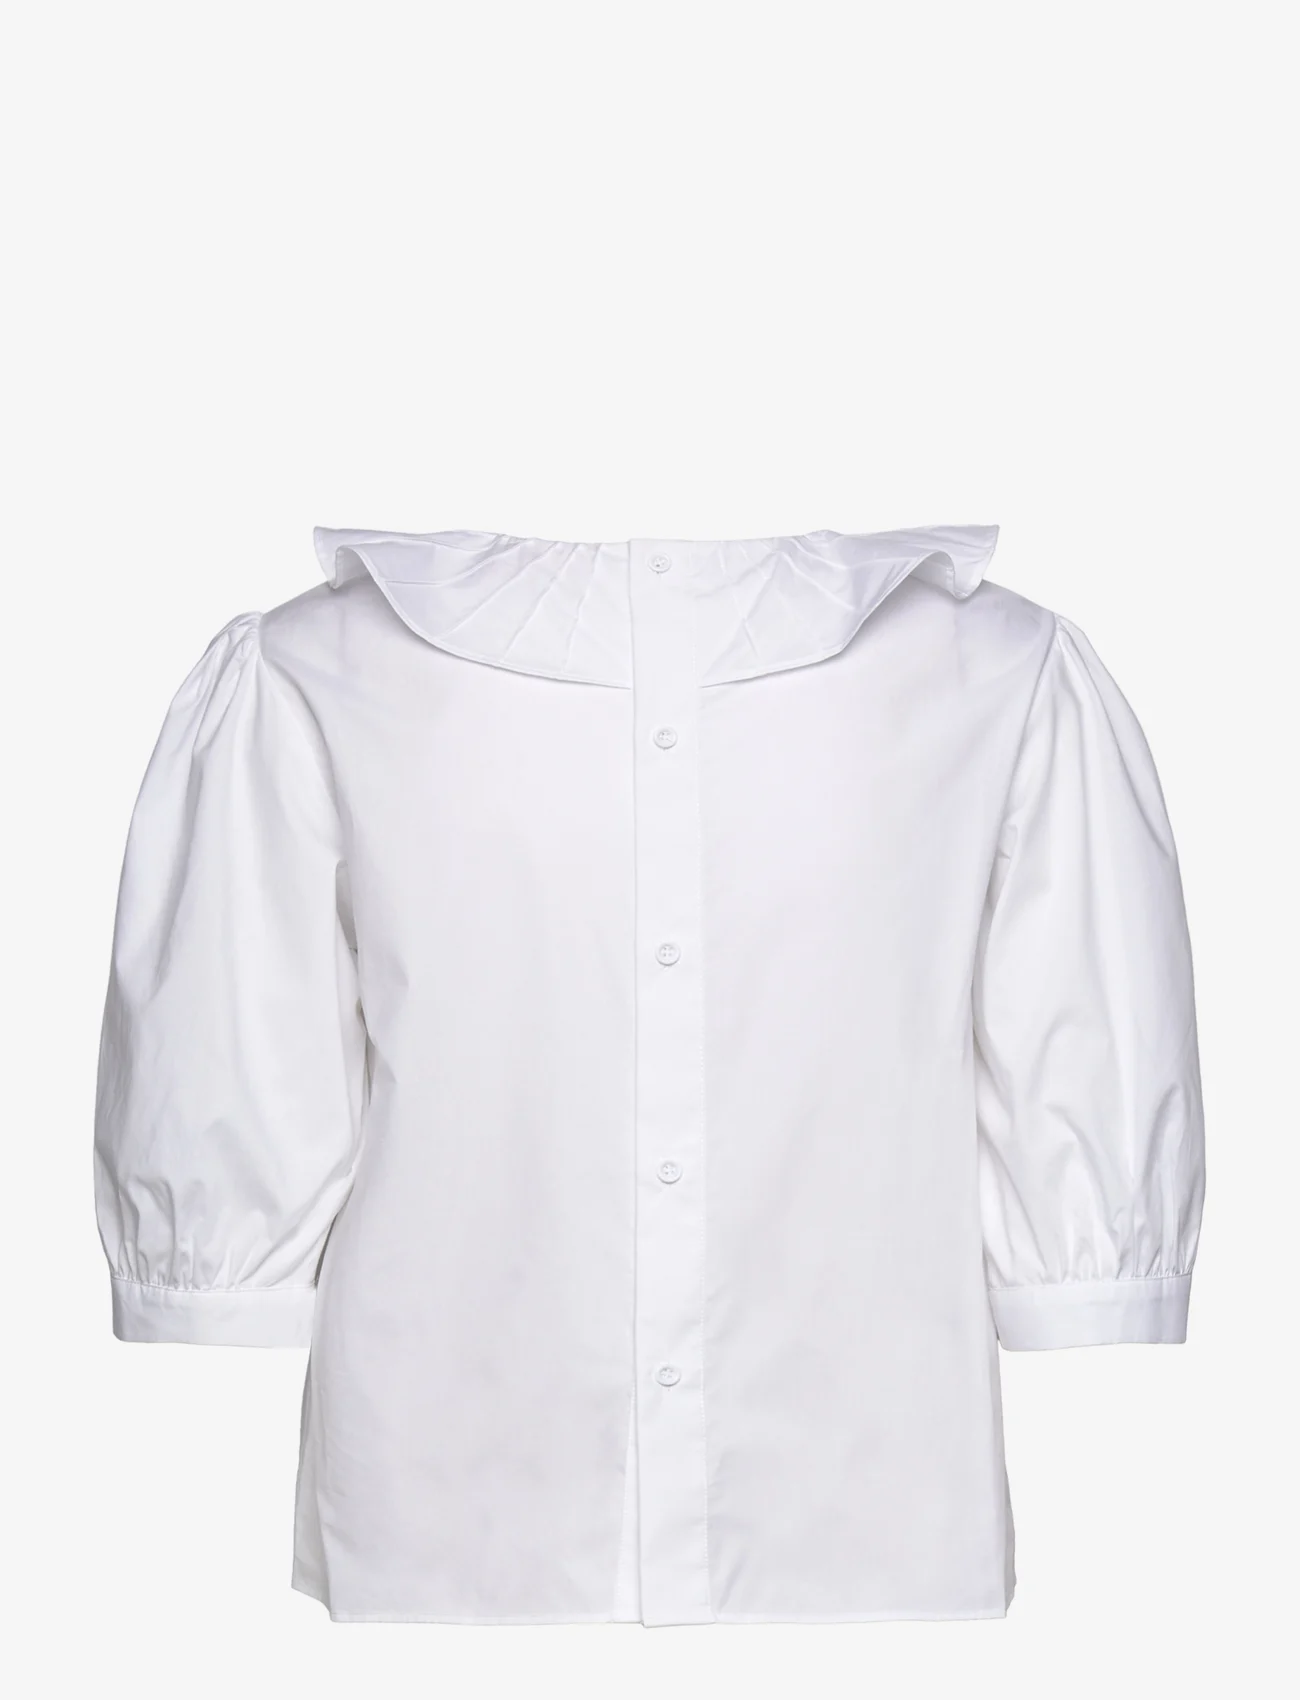 See by Chloé - Top - short-sleeved blouses - white - 1